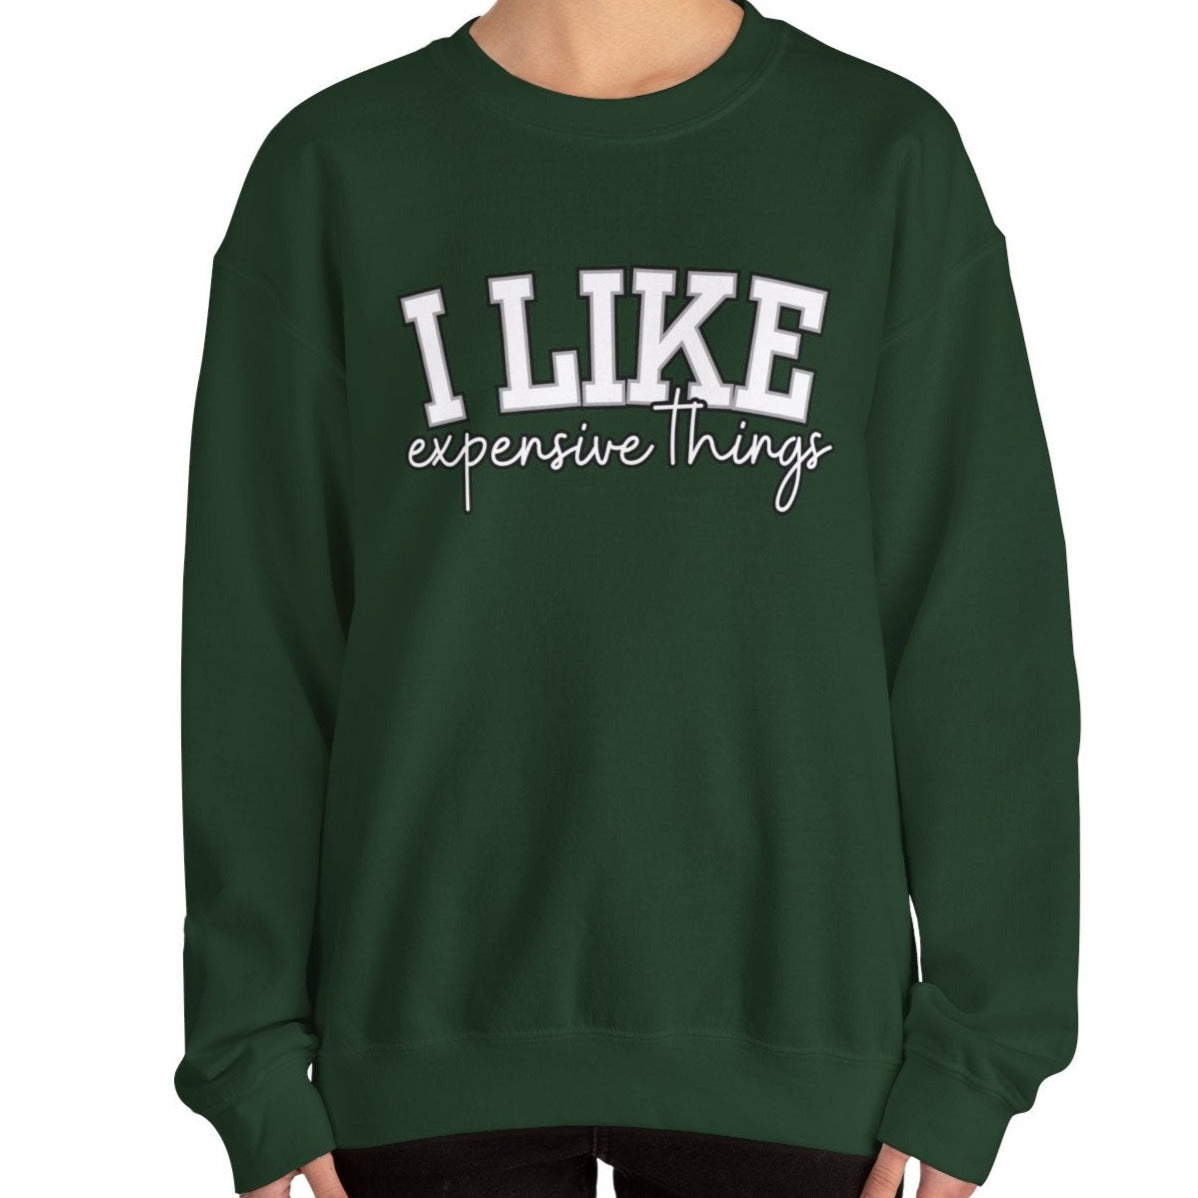 Women's Sweatshirt - 'I Like Expensive Things' - Luxe Comfort and Chic Style for Fashion-Forward Elegance - Eddy and Rita